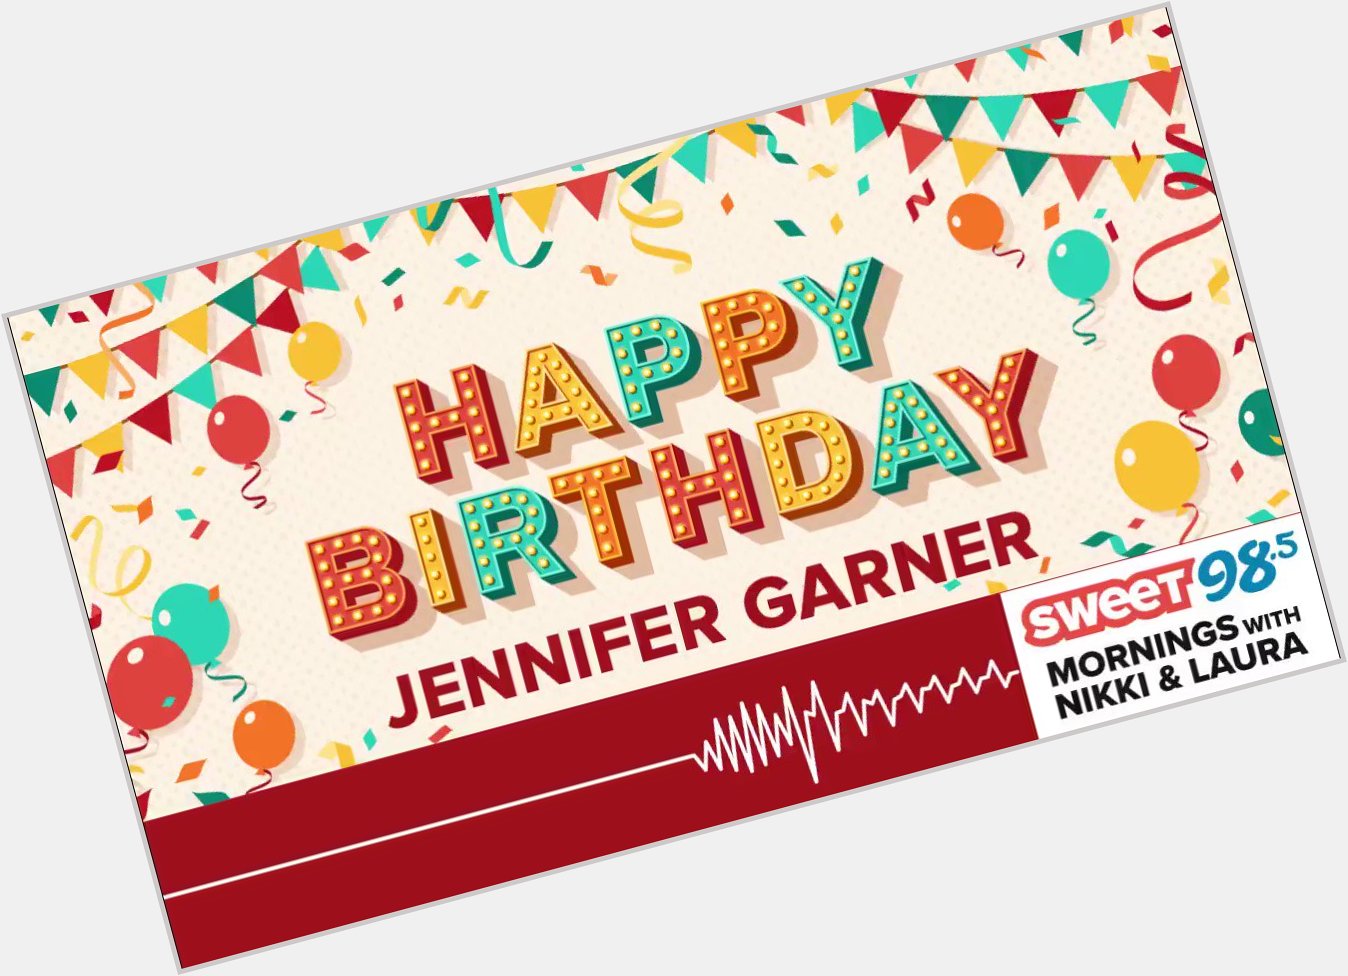 It was an exciting day on Sweet 98.5 Mornings with Nikki & Laura... Happy Birthday to our fav, Jennifer Garner! 